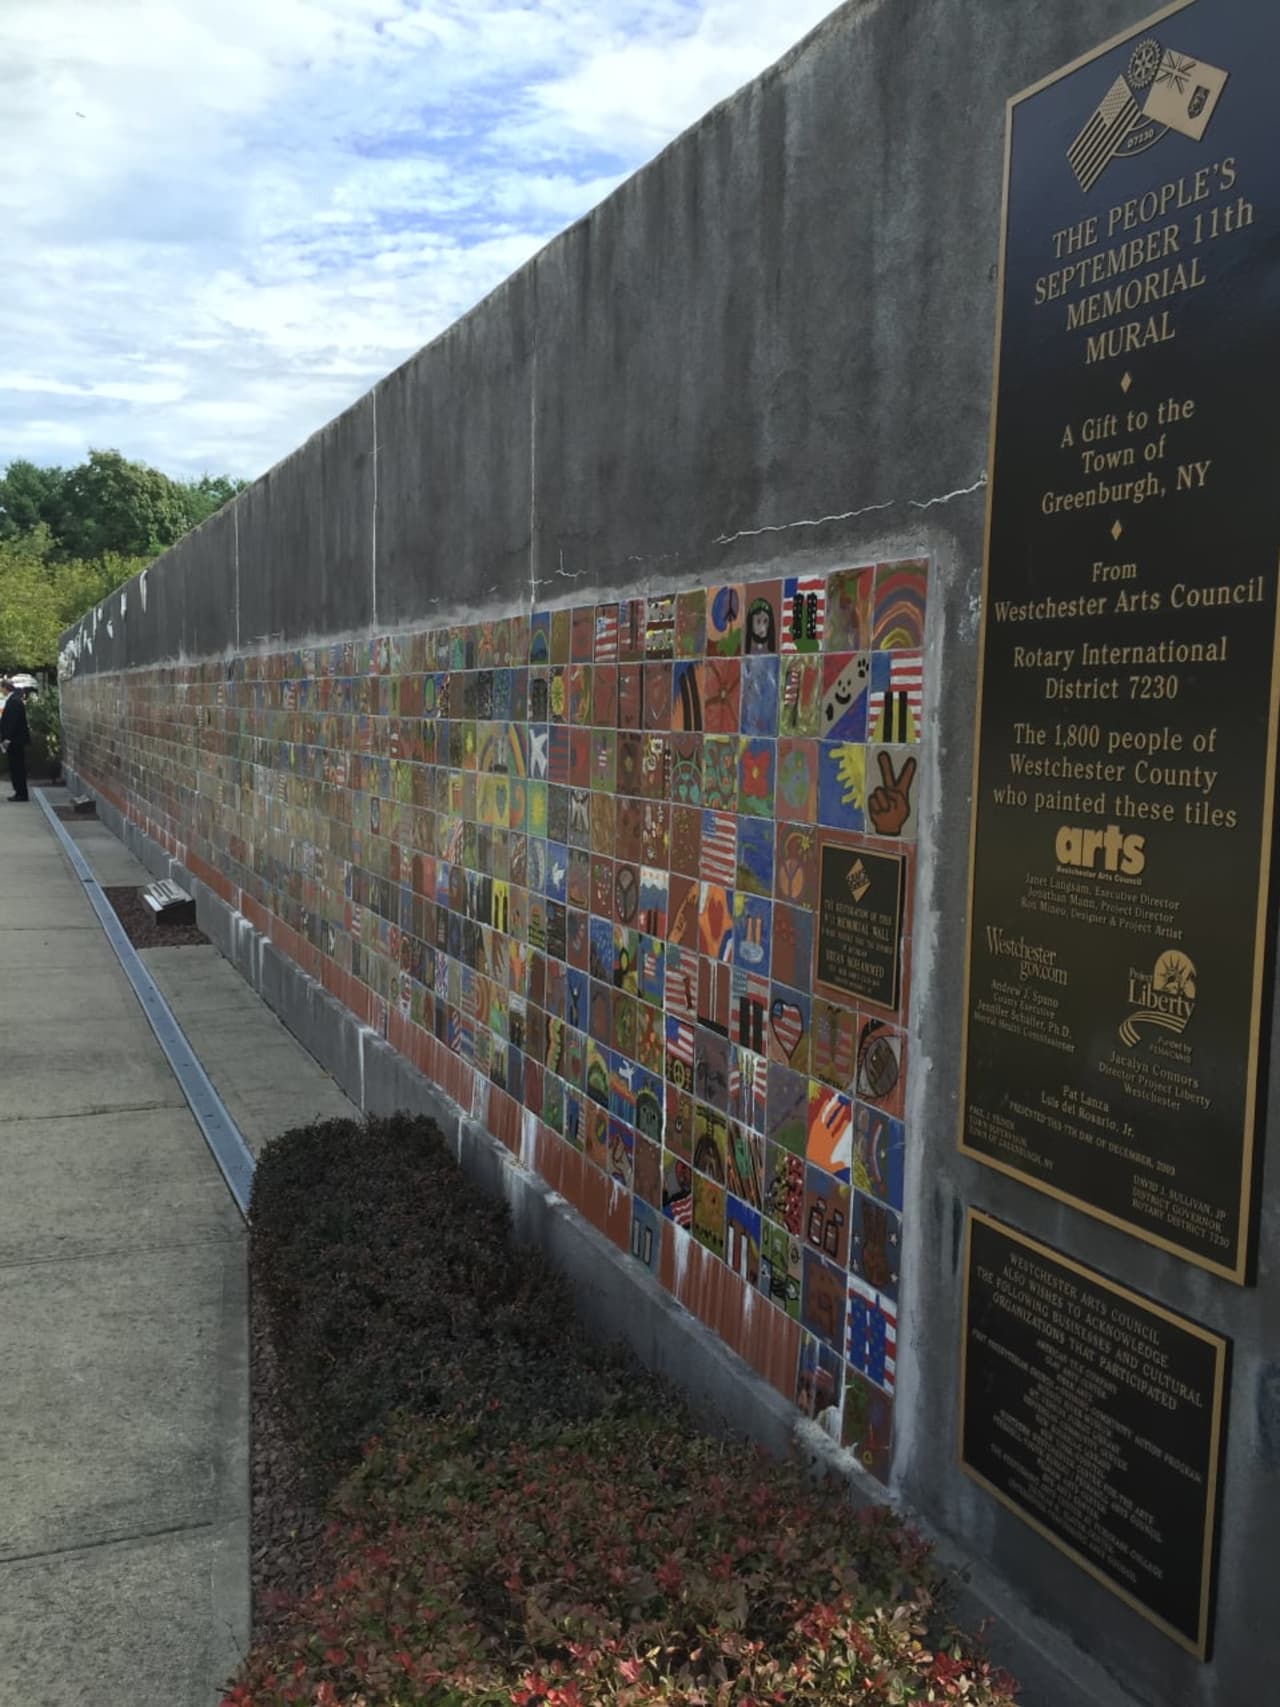 Southern Westchester BOCES has taken on a project to restore and maintain a handpainted mural at Webb Field in Greenburgh, dedicated to the victims of 9/11.